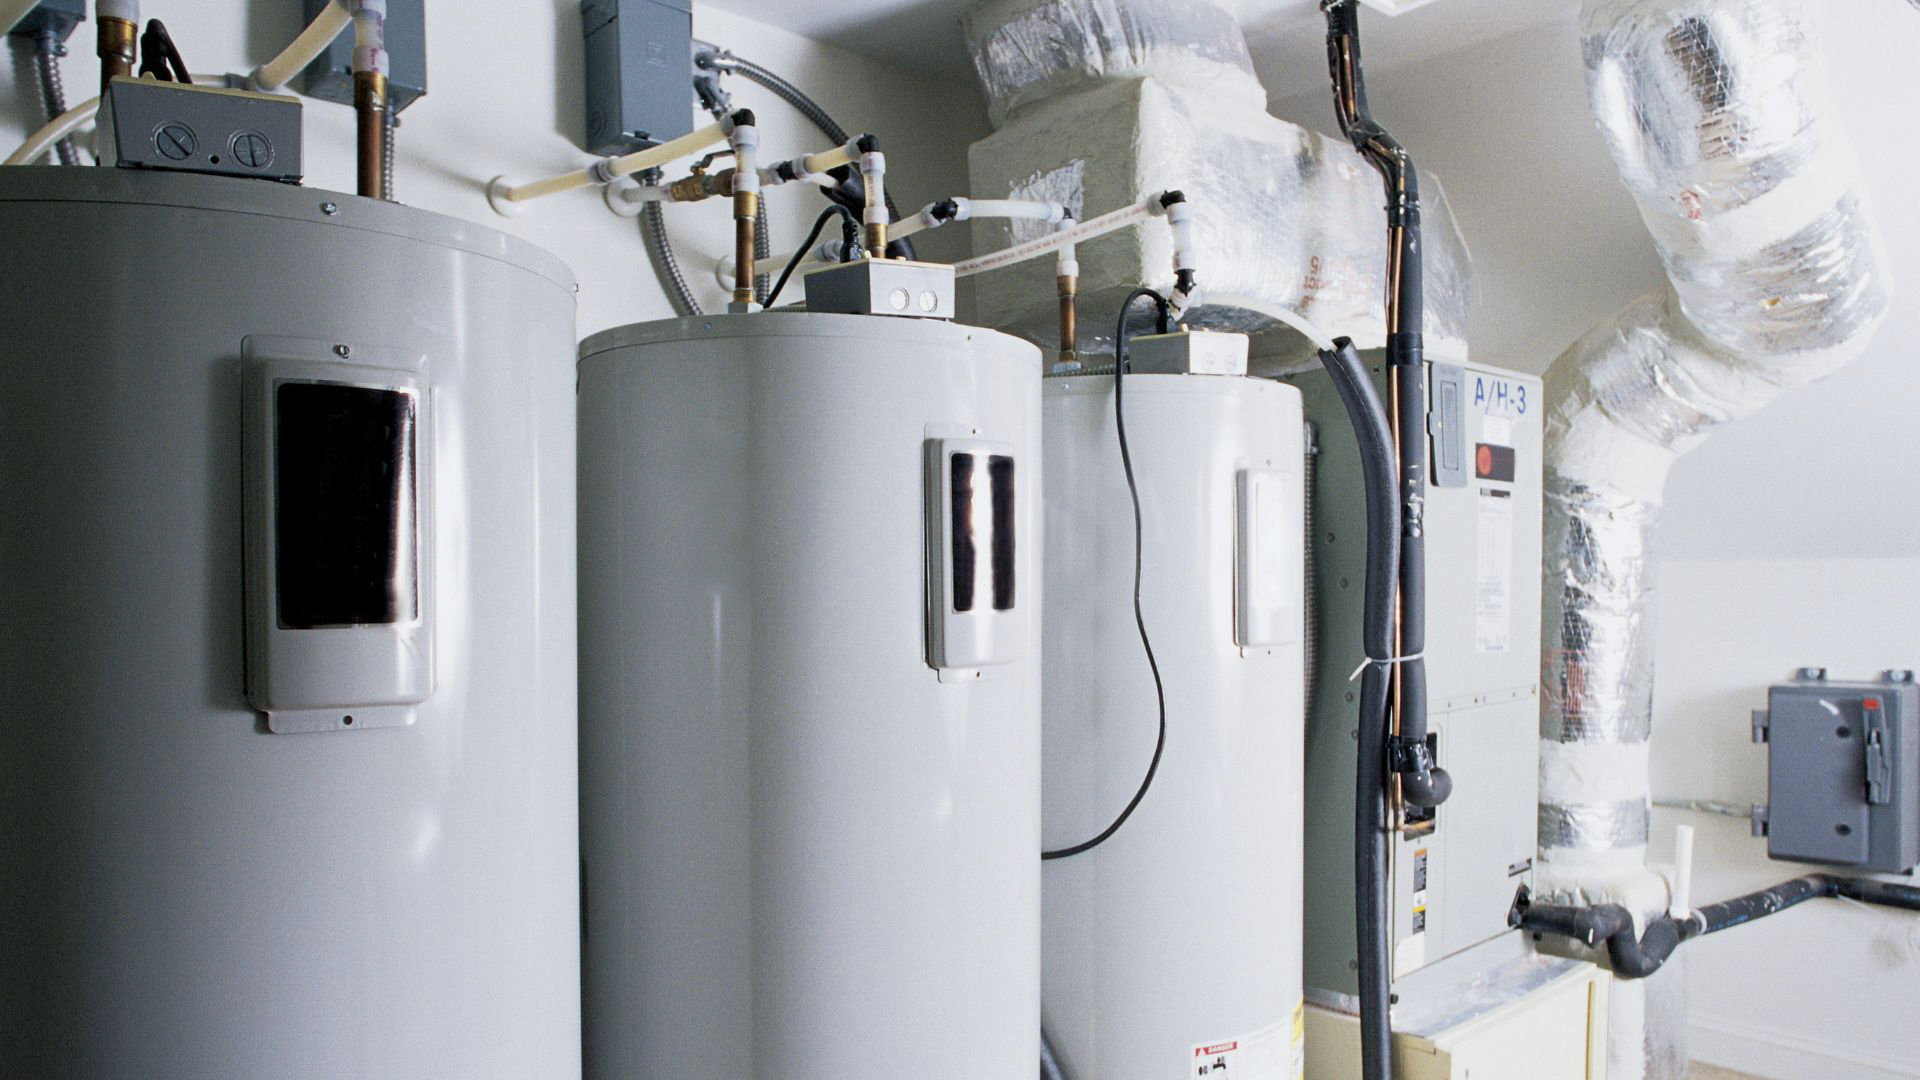 Water Heater Replacement in Golden, CO from Fix-it 24/7 Plumbing, Heating, Air & Electric